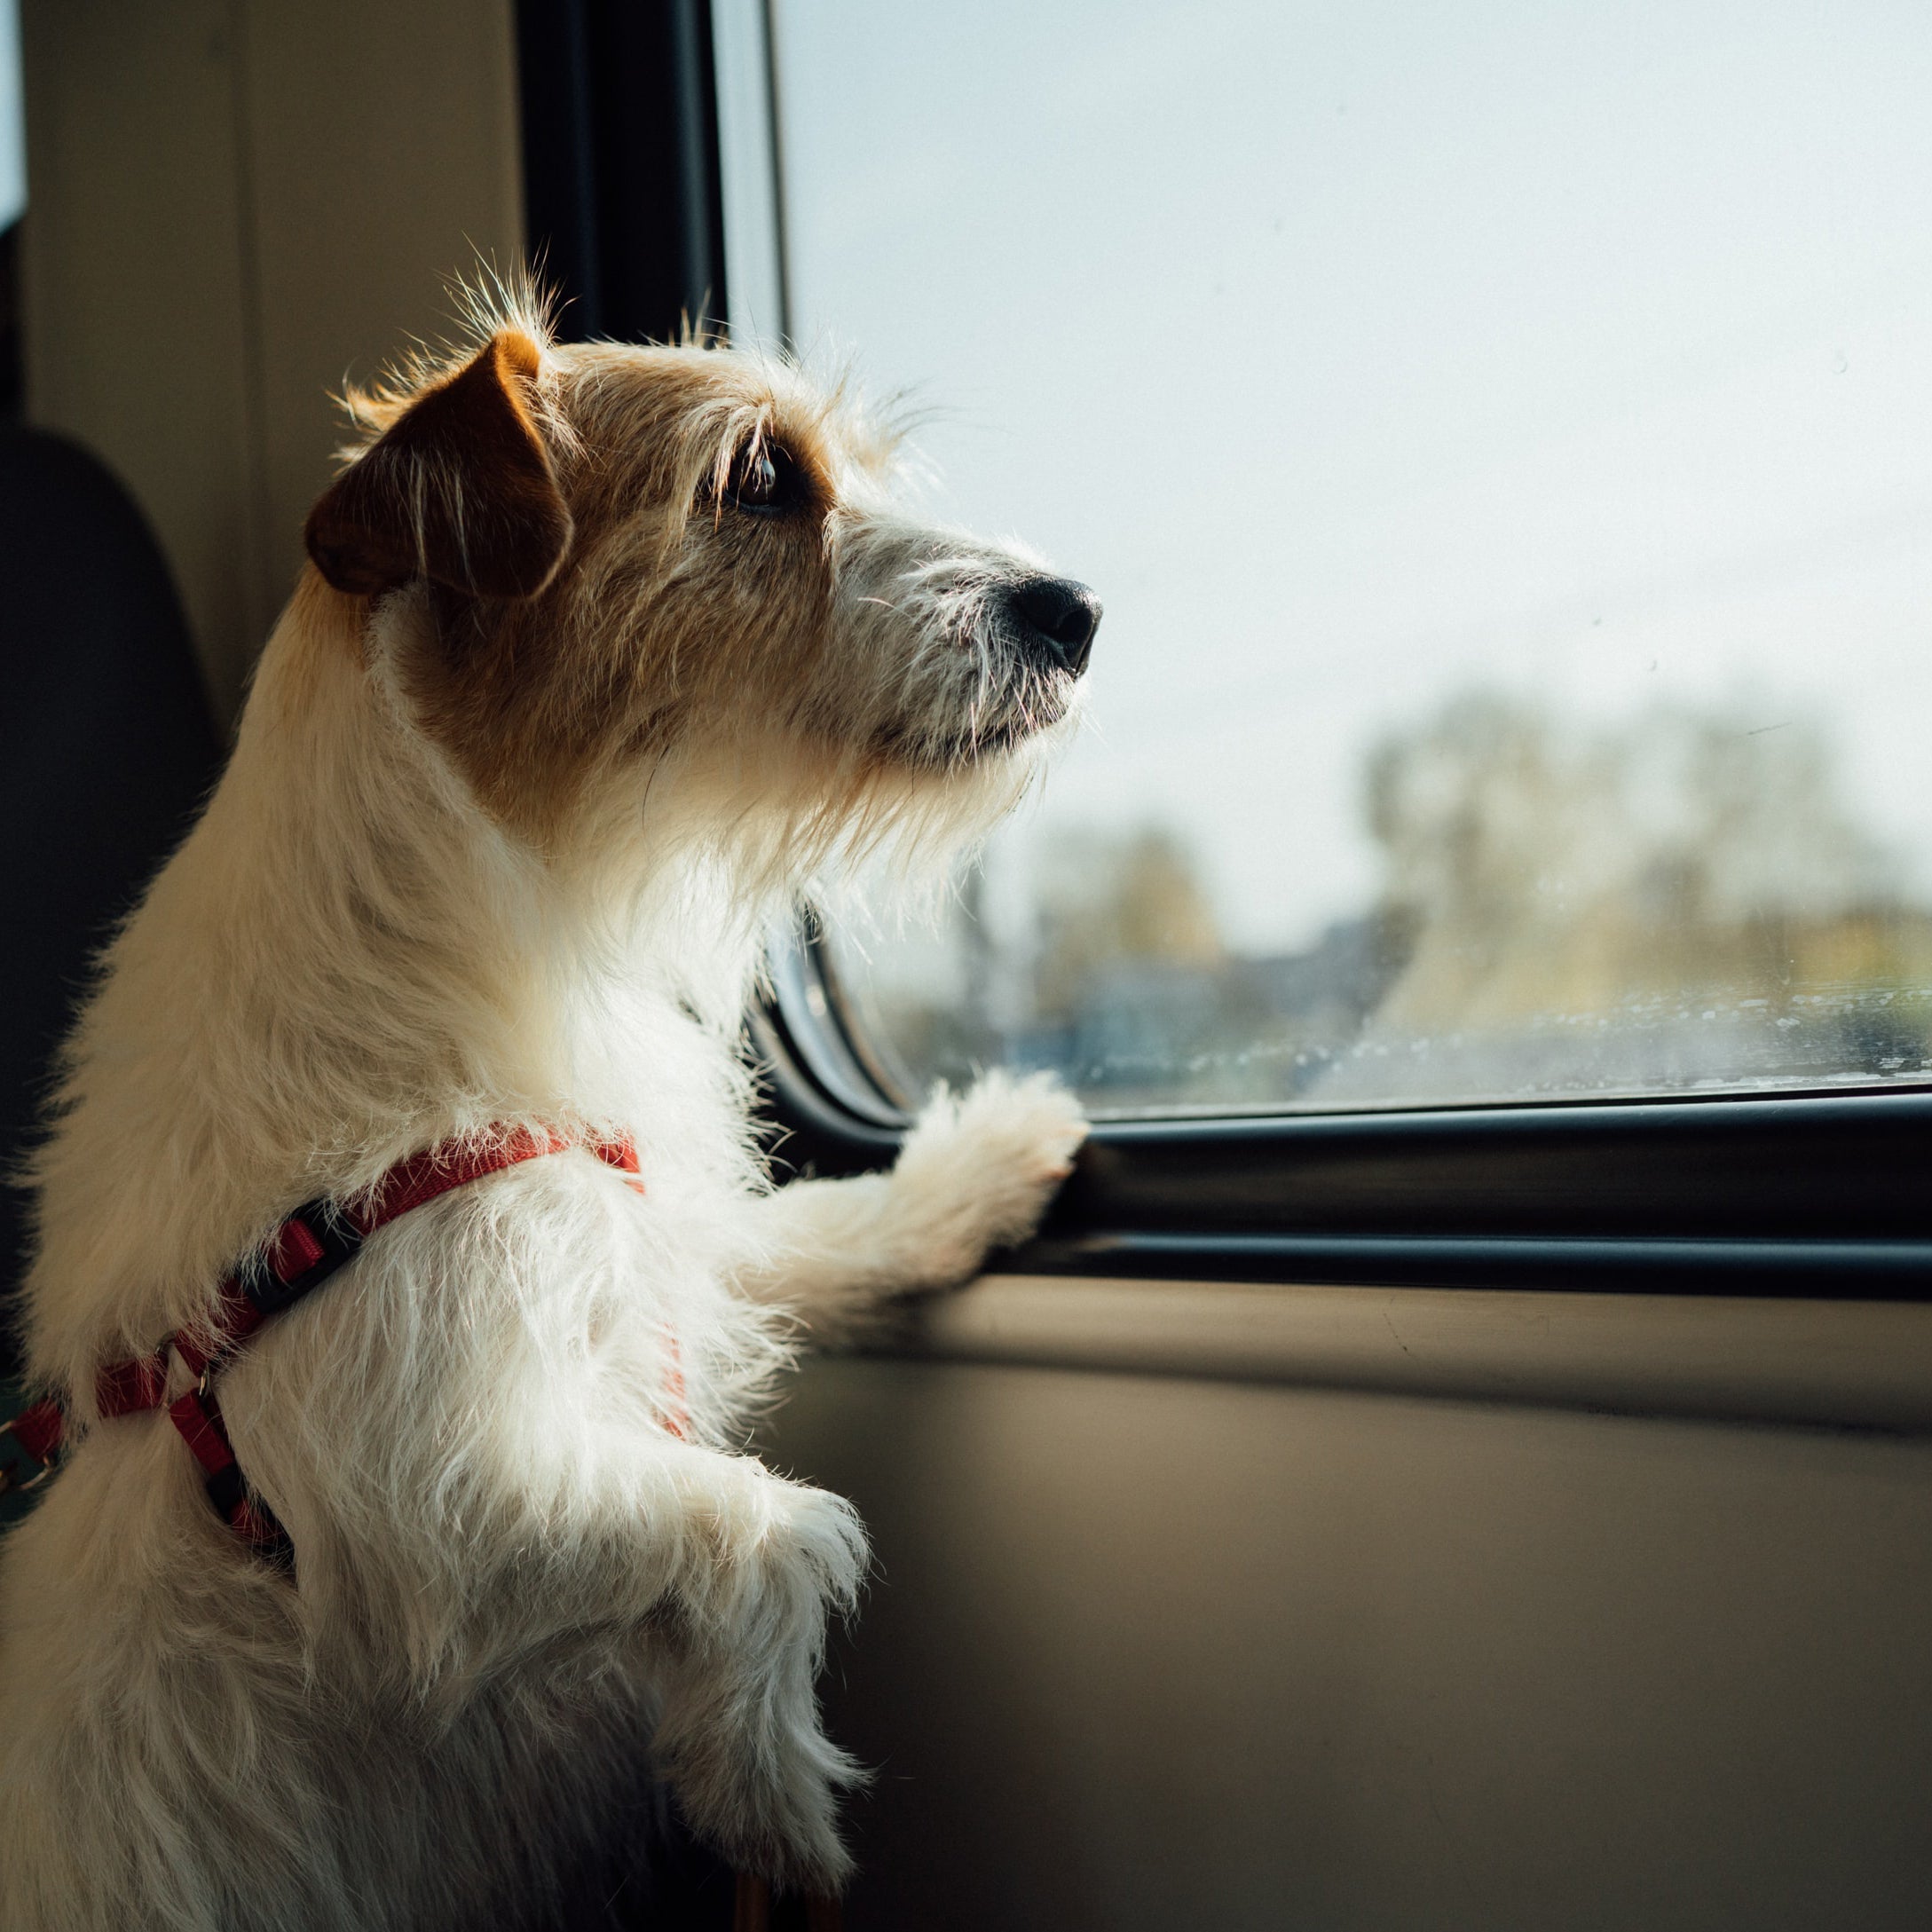 traveling with dog, traveling with pets, vacations with pets, pet-friendly vacation tips 